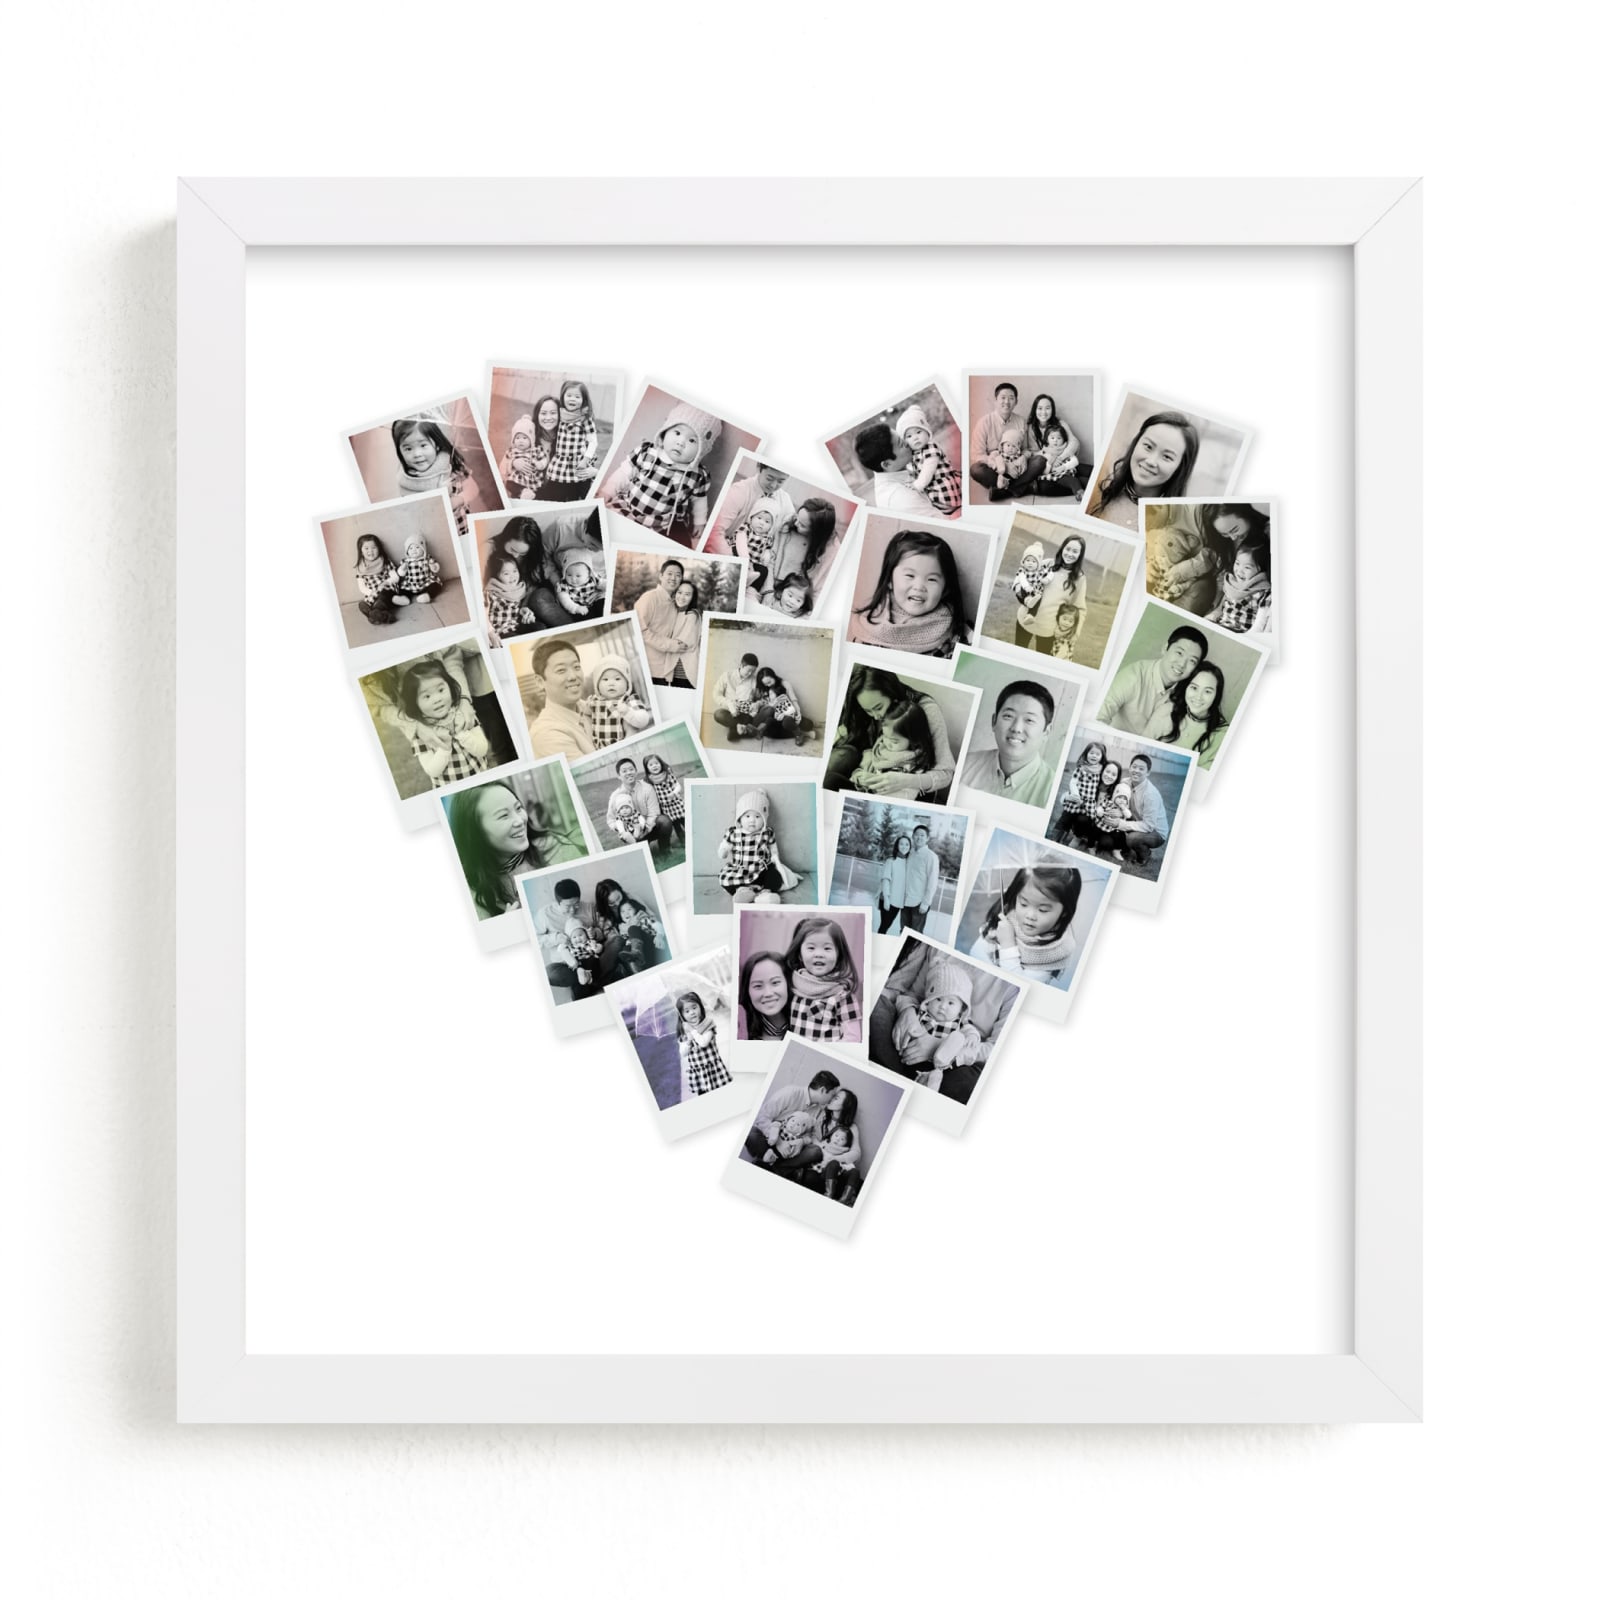 This is a colorful photo art by Minted called Filter Heart Snapshot Mix® Photo Art.